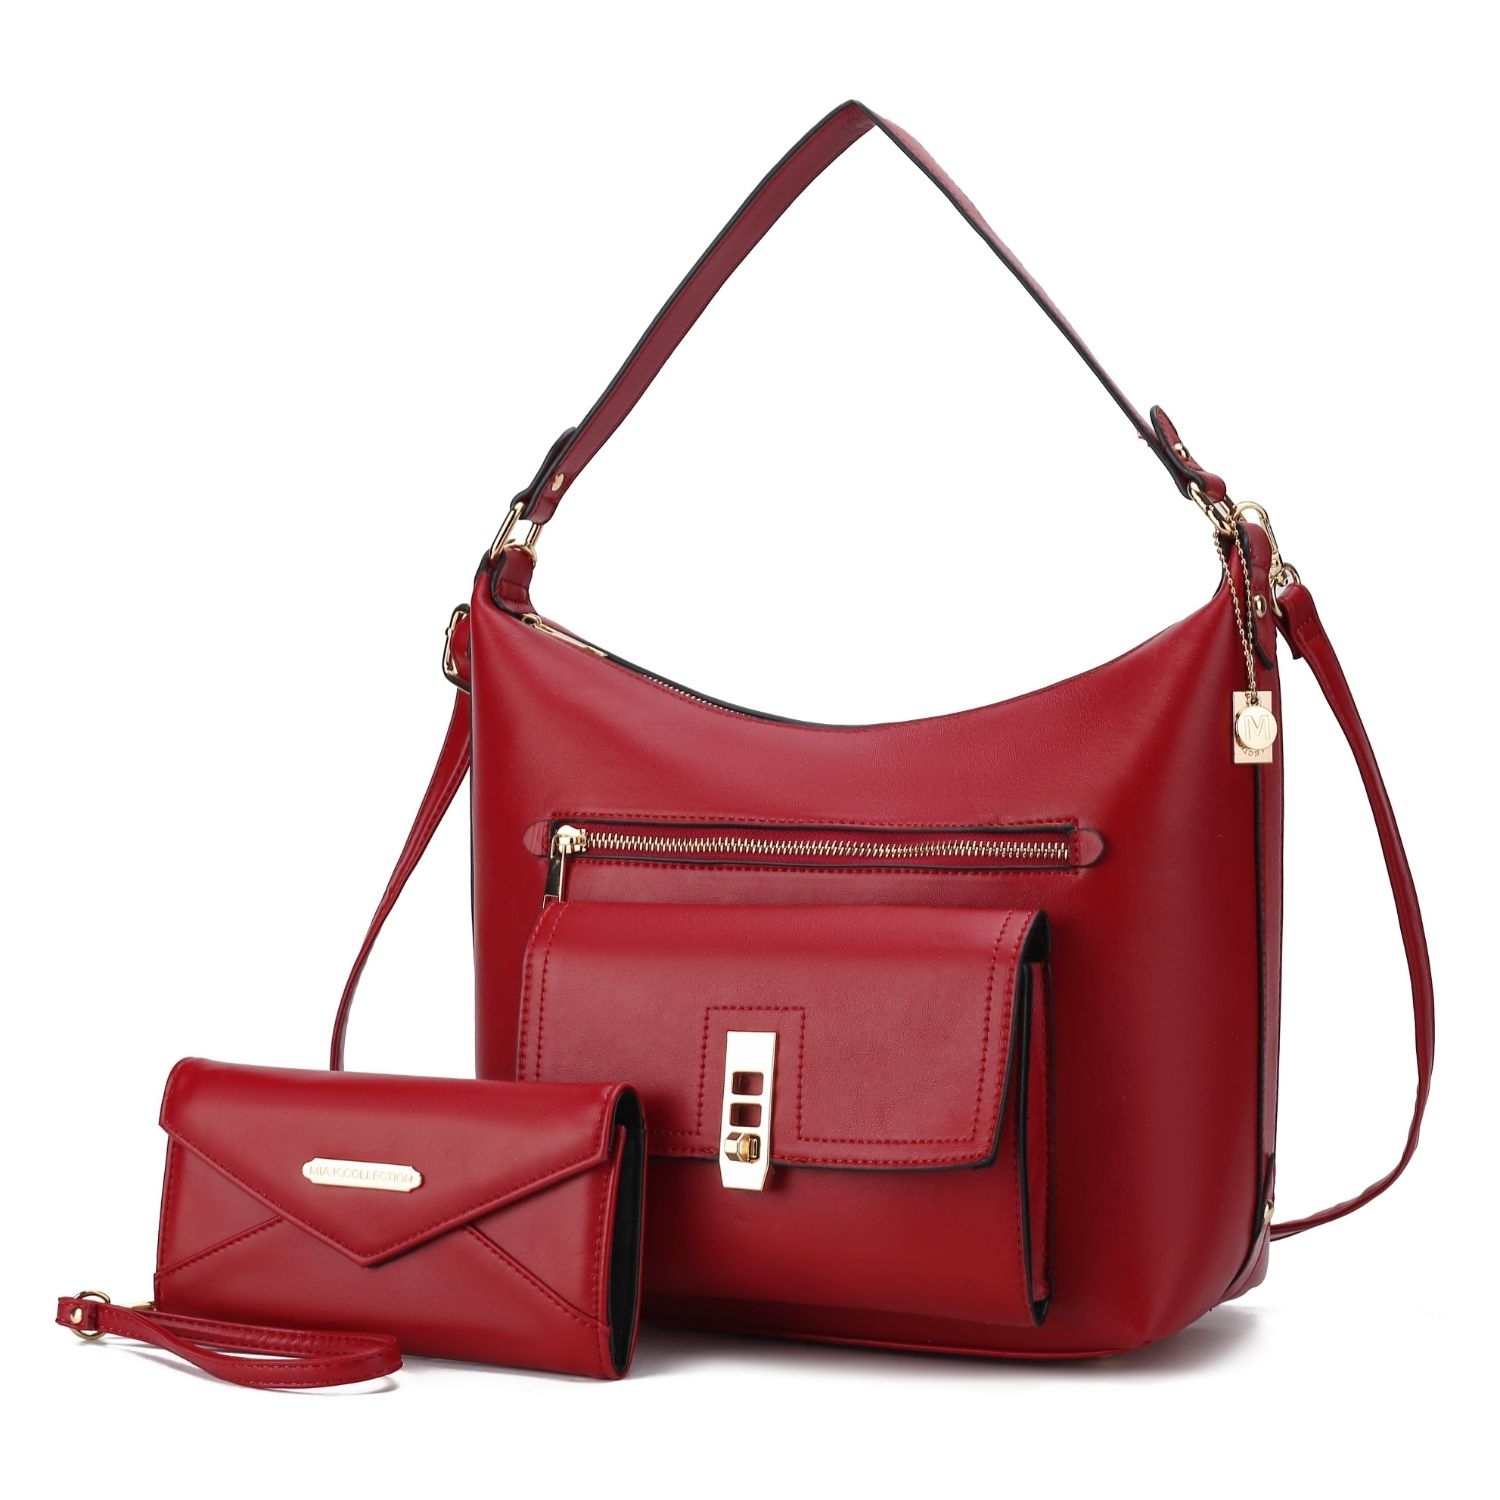 MKF Collection Clara Vegan Leather Women's Shoulder Bag With Wristlet Wallet - 2 Pieces By Mia K - Wine